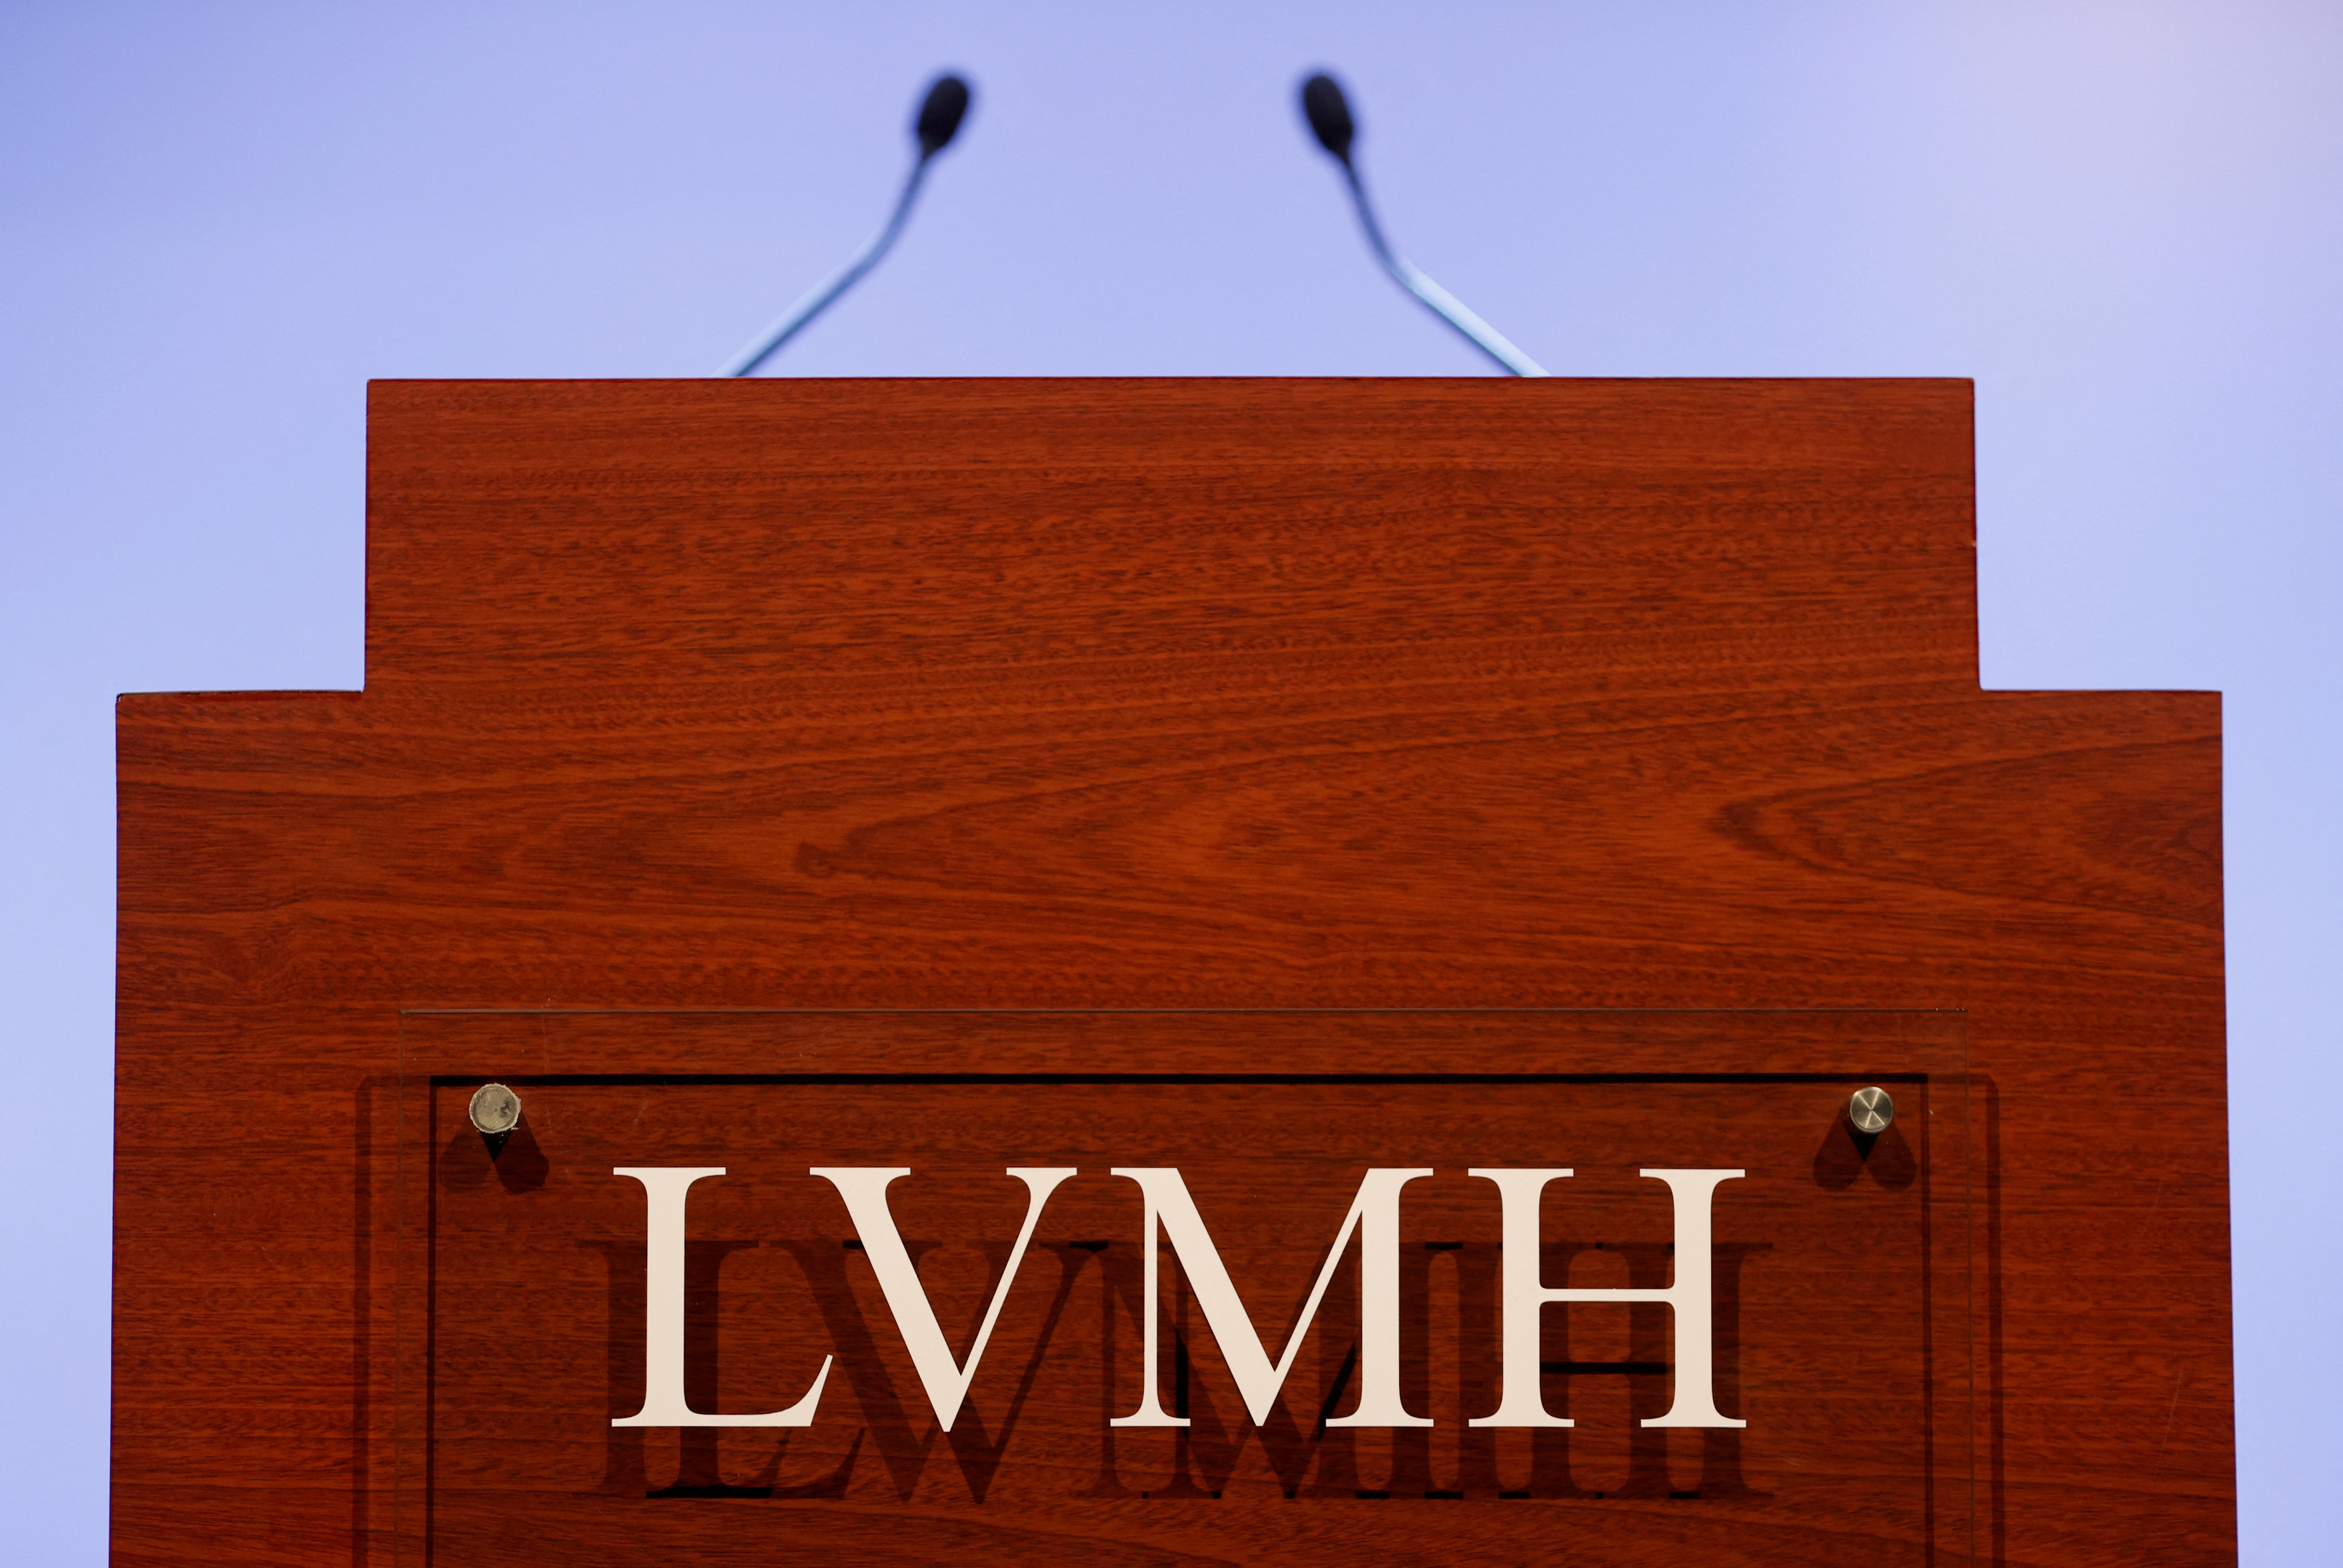 Will luxury brand LVMH continue to outpace the stock market